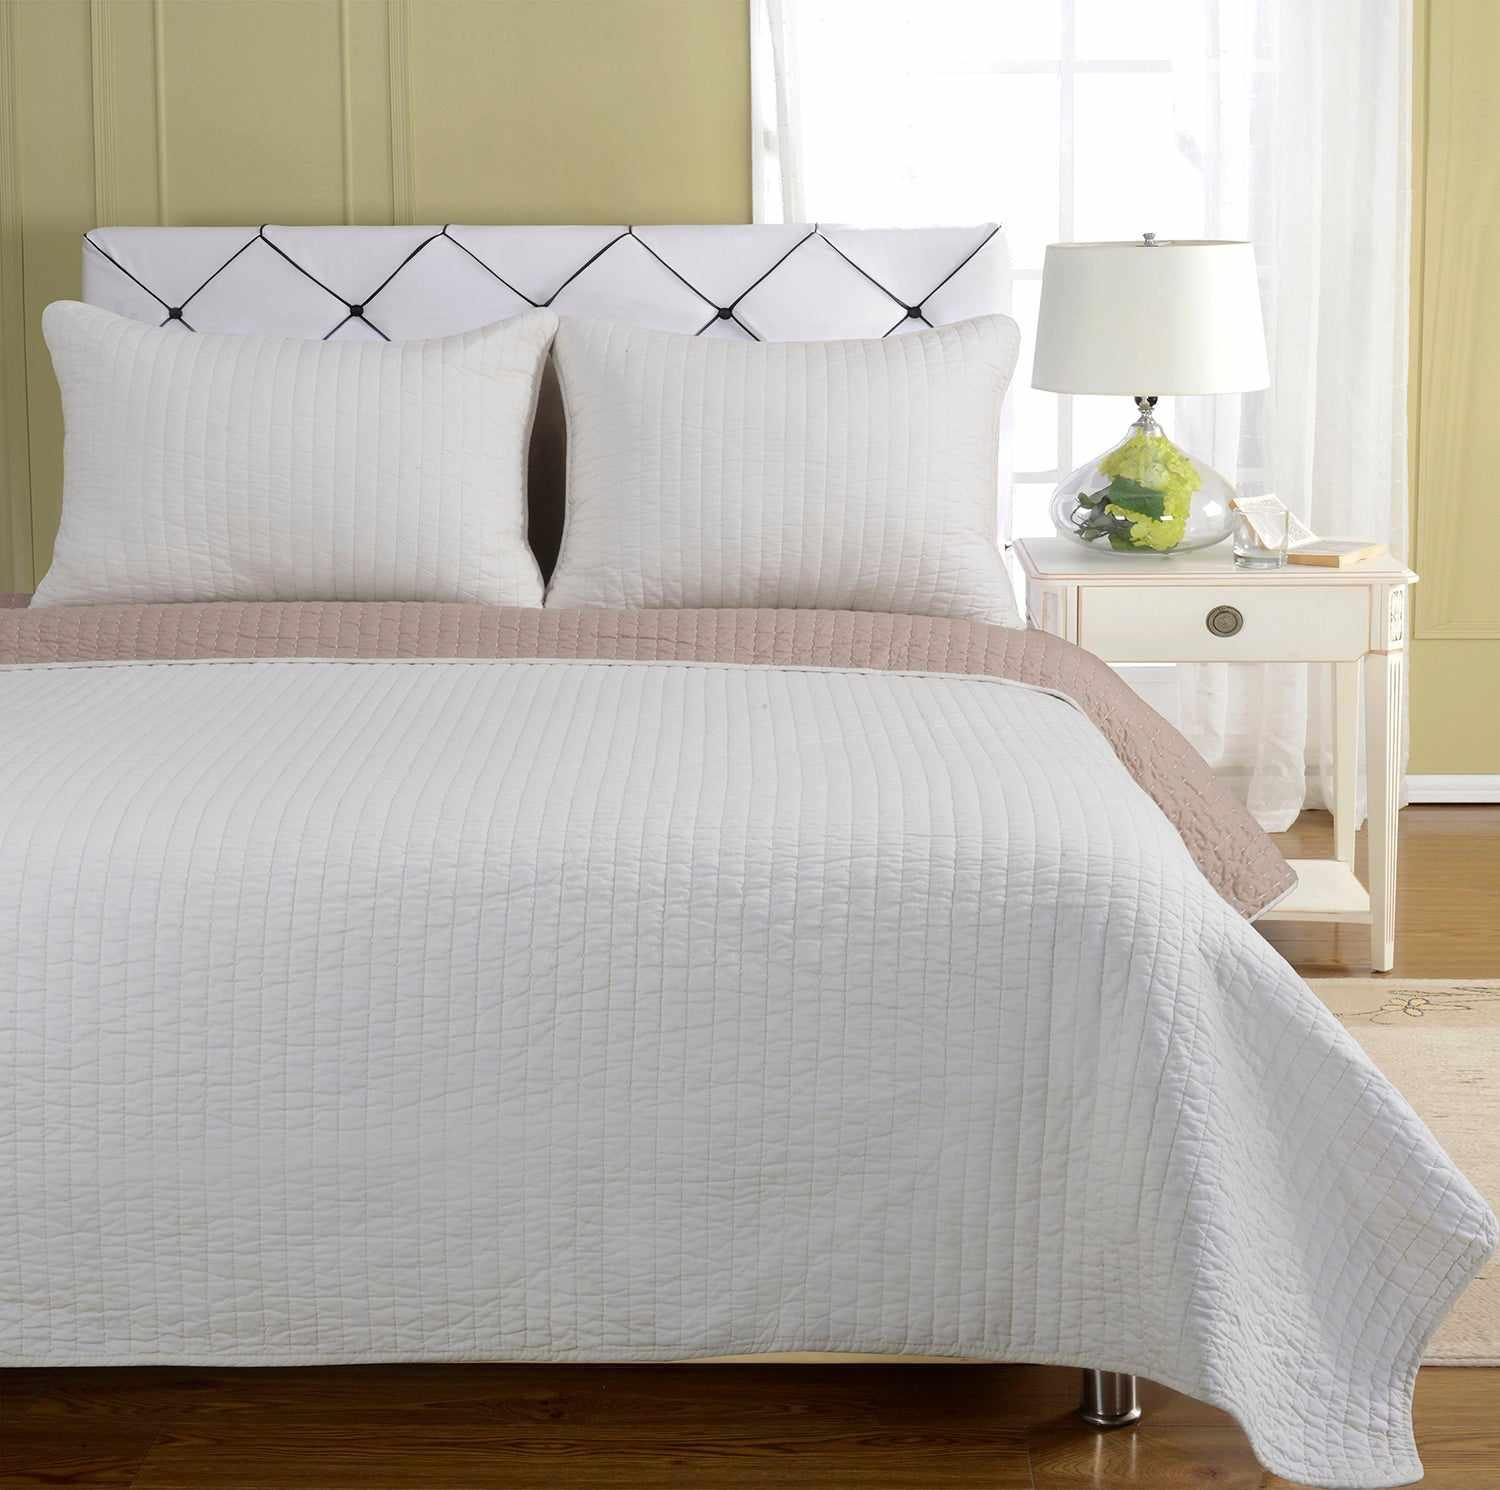 Harley Combed Cotton Quilt Set - Ivory